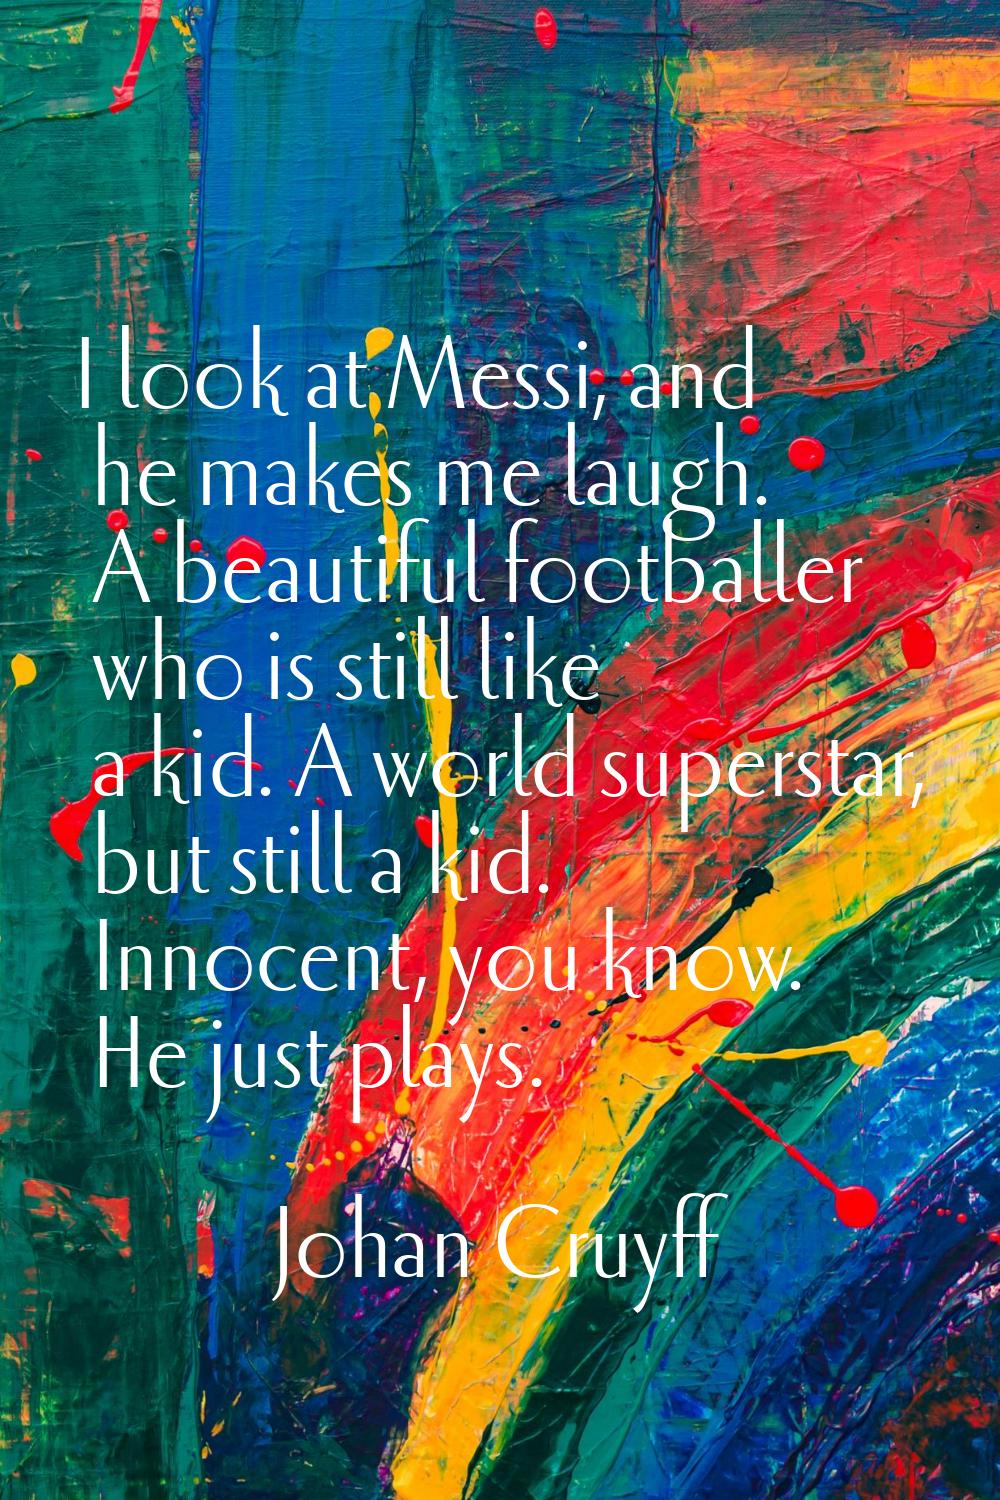 I look at Messi, and he makes me laugh. A beautiful footballer who is still like a kid. A world sup